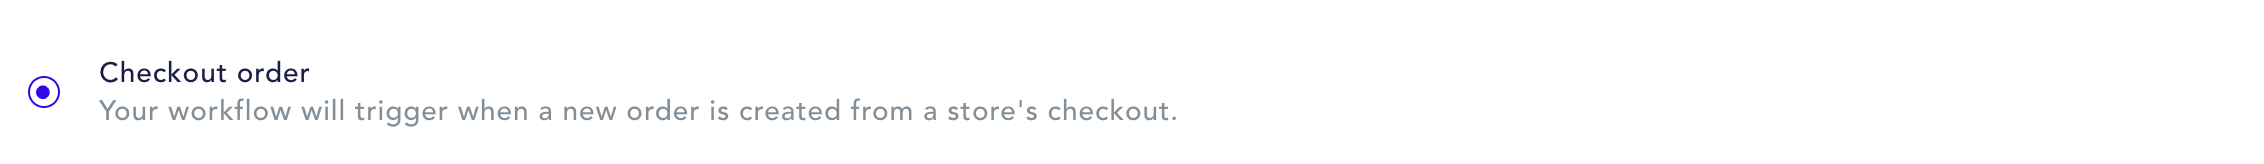 Example image of a checkout order trigger